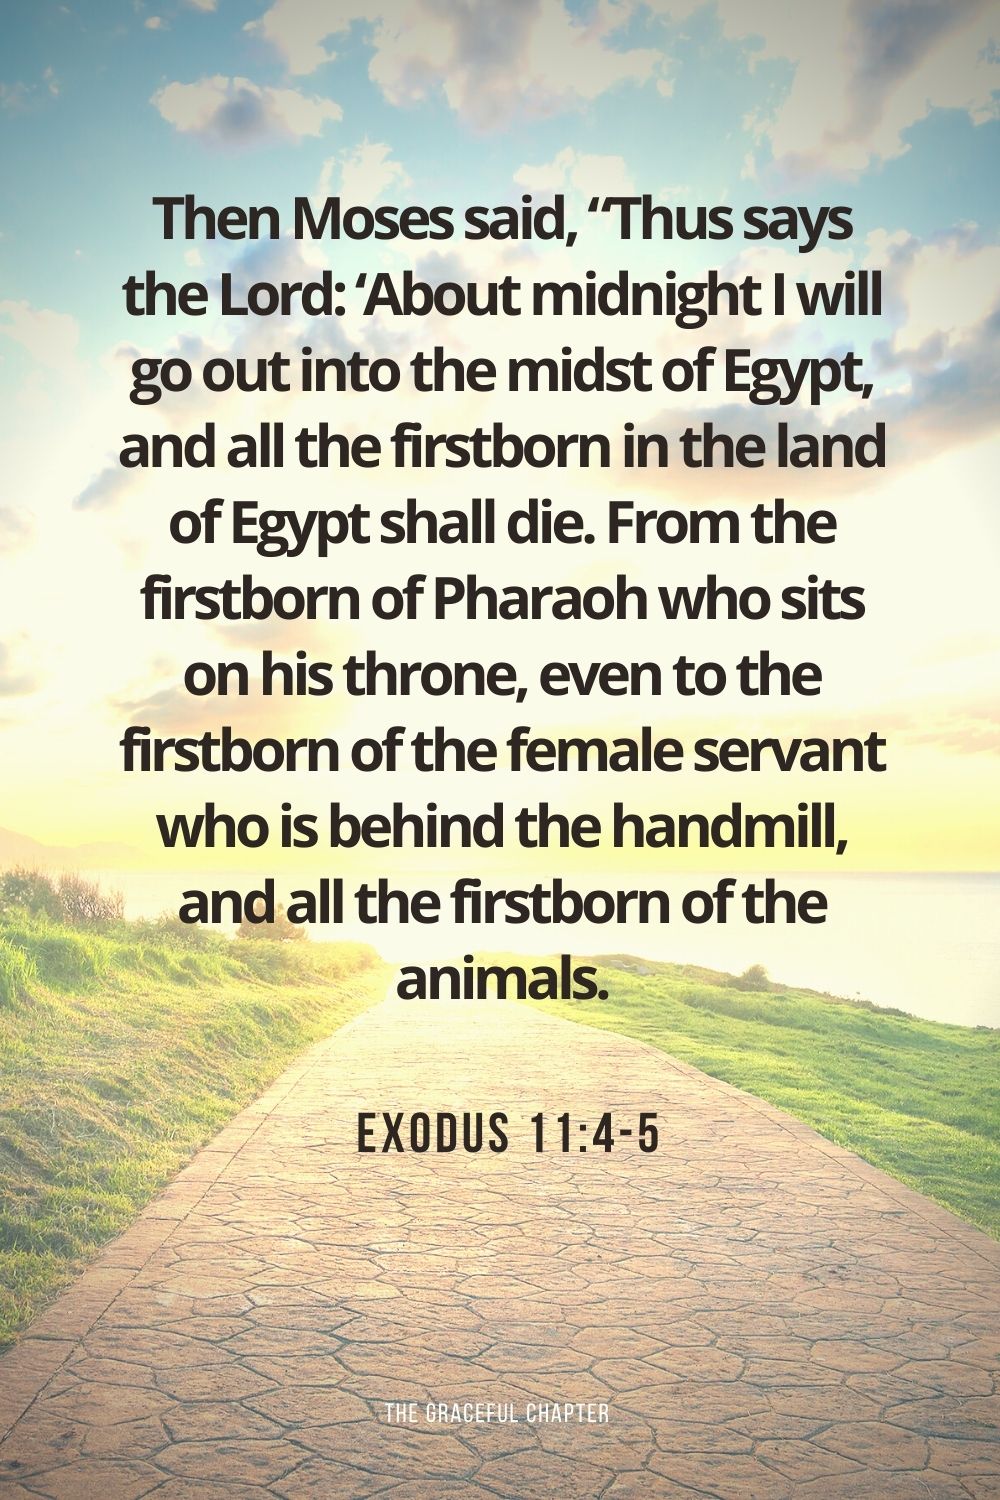 Then Moses said, “Thus says the Lord: ‘About midnight I will go out into the midst of Egypt, and all the firstborn in the land of Egypt shall die. From the firstborn of Pharaoh who sits on his throne, even to the firstborn of the female servant who is behind the handmill, and all the firstborn of the animals. Exodus 11:4-5